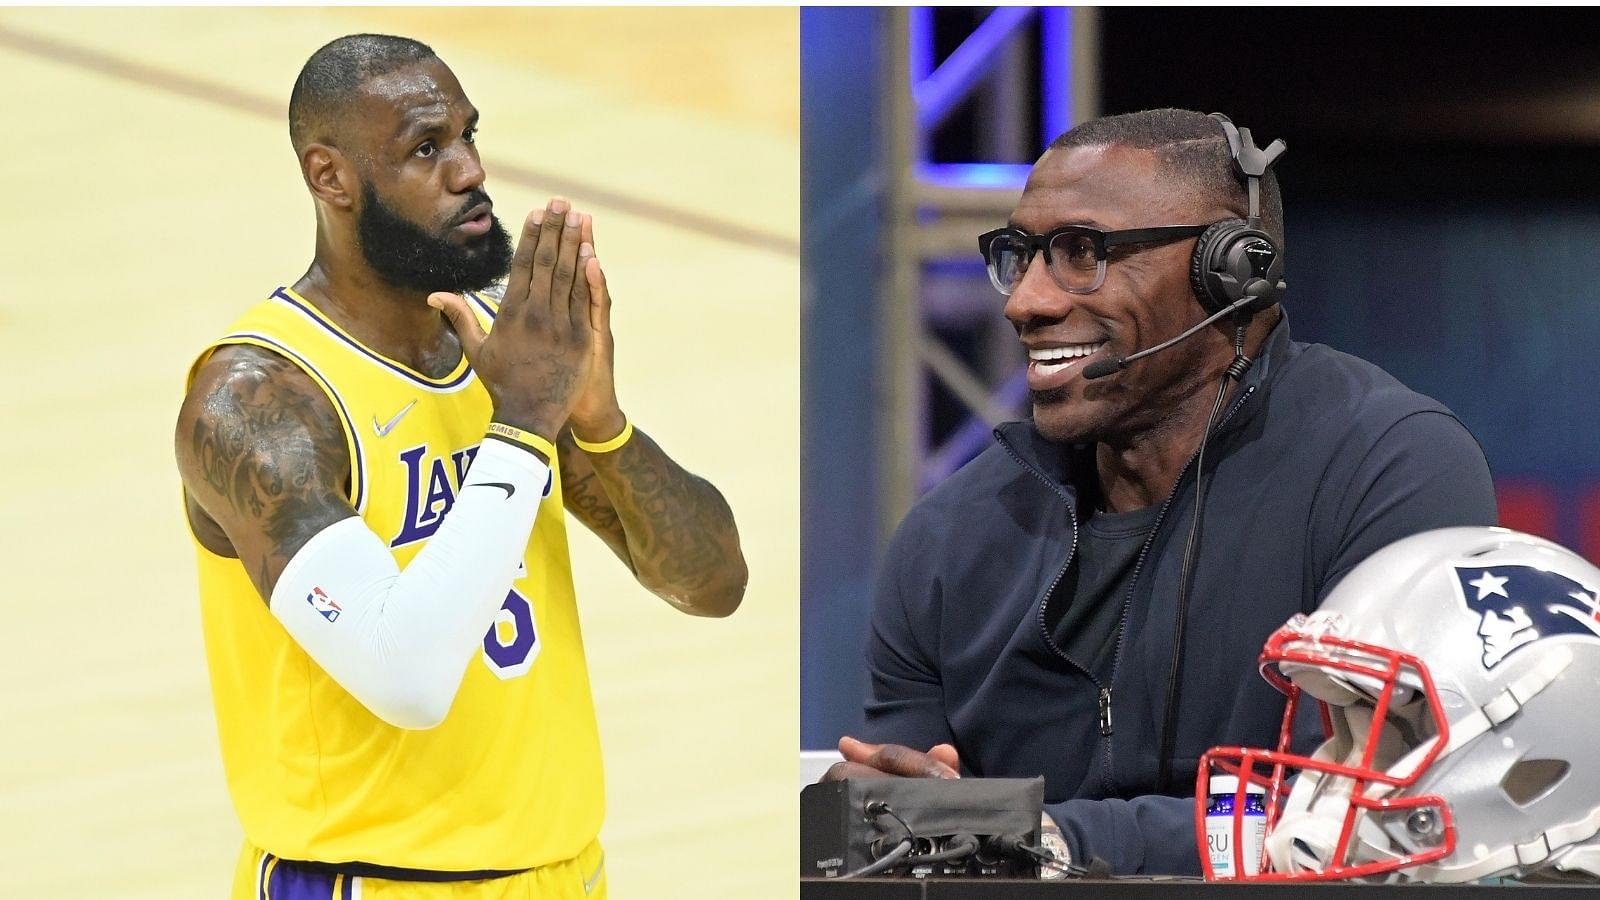 “LeBron James & Co Couldn’t Guard a Parked Car With UZI”: Shannon Sharpe Goes Critical of Lakers as They Trail Short-handed Wolves